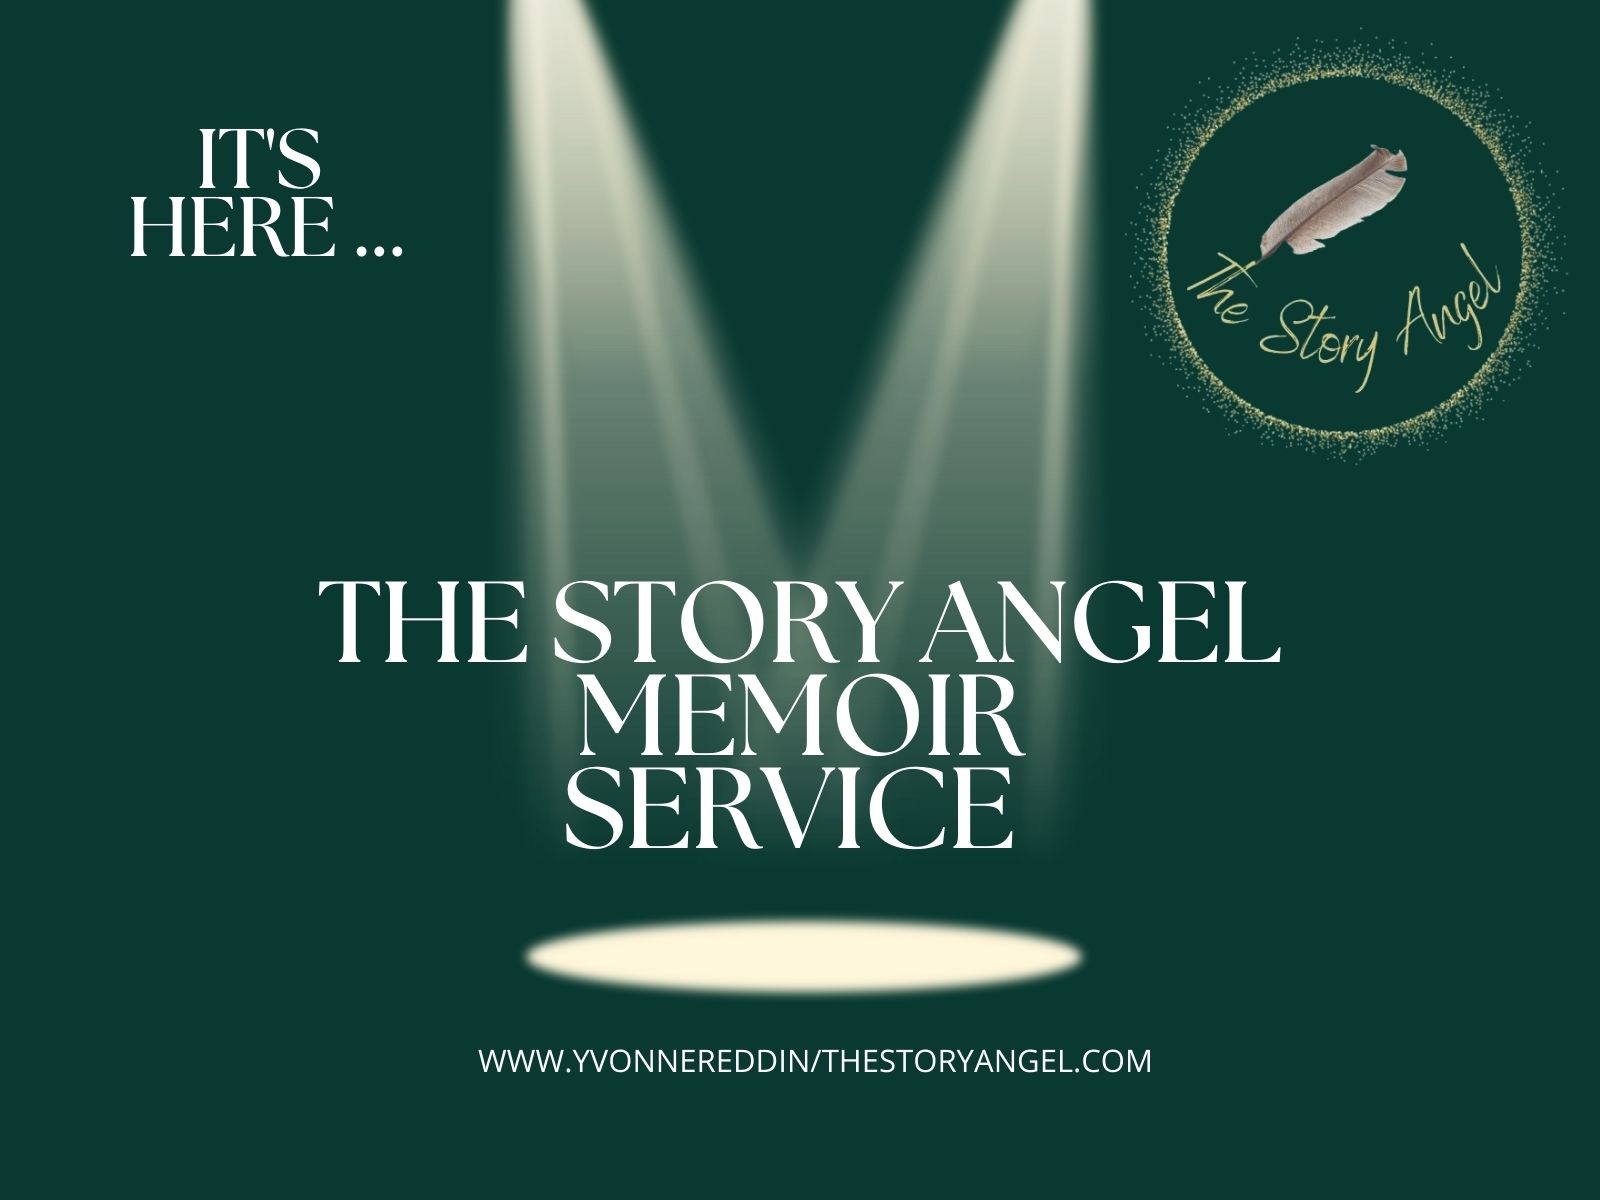 The Story Angel graphic